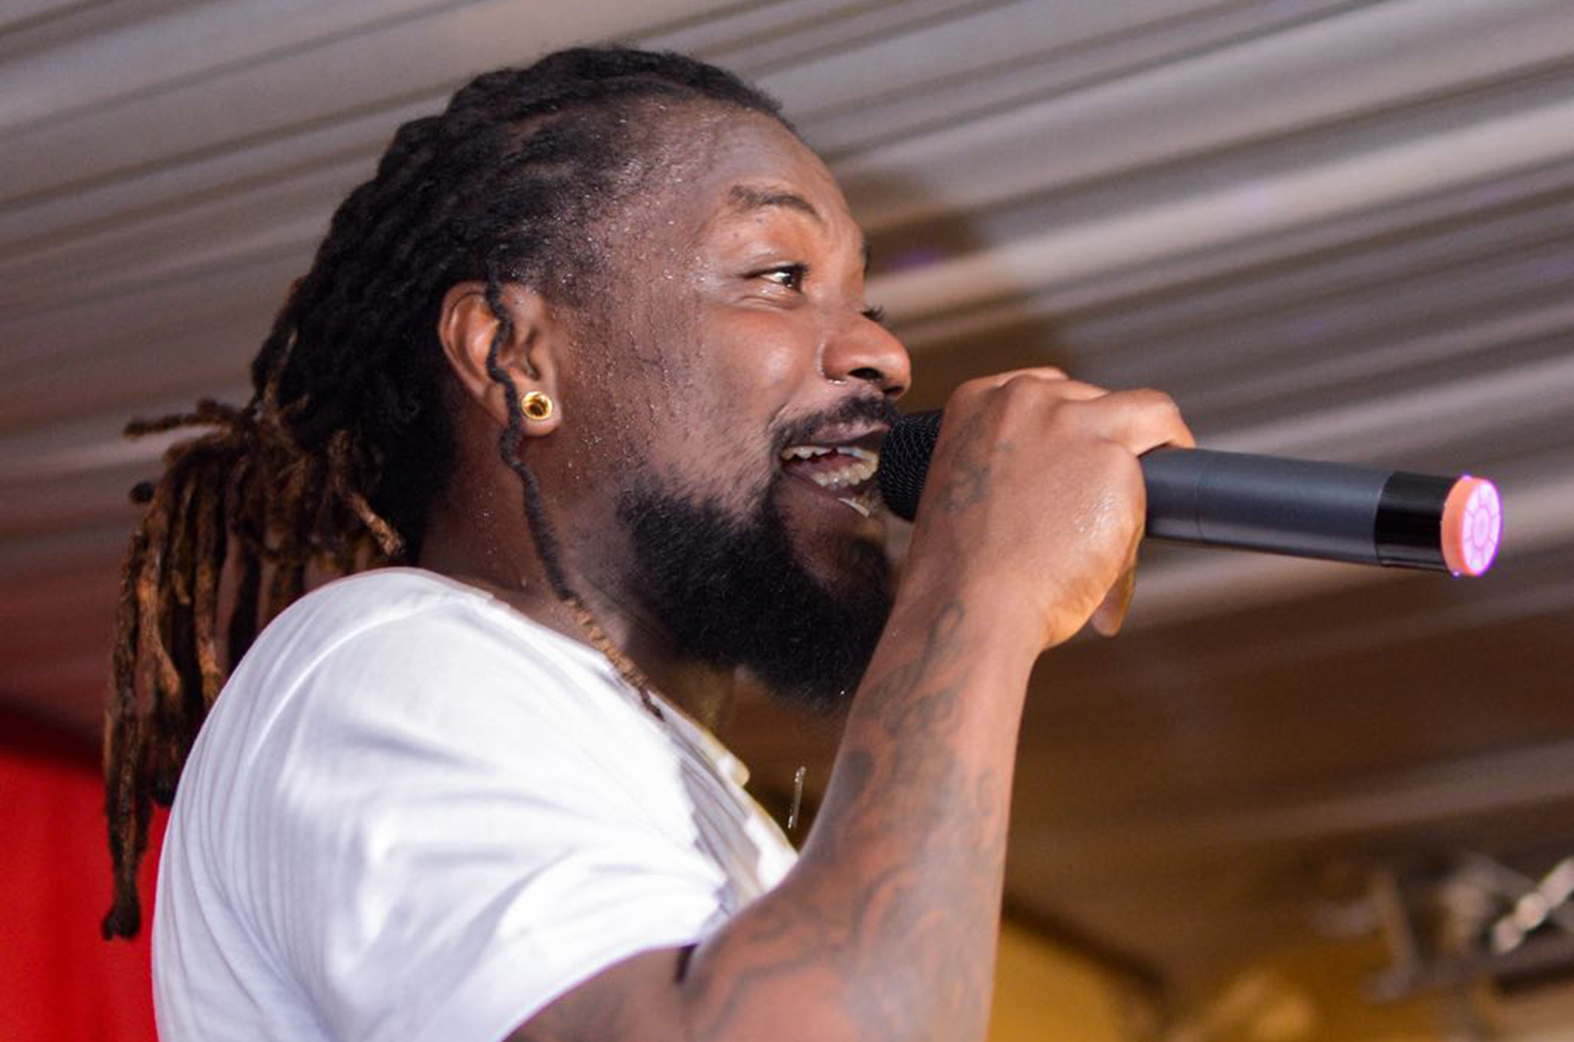 Fans in Italy want more as Samini rocks concert